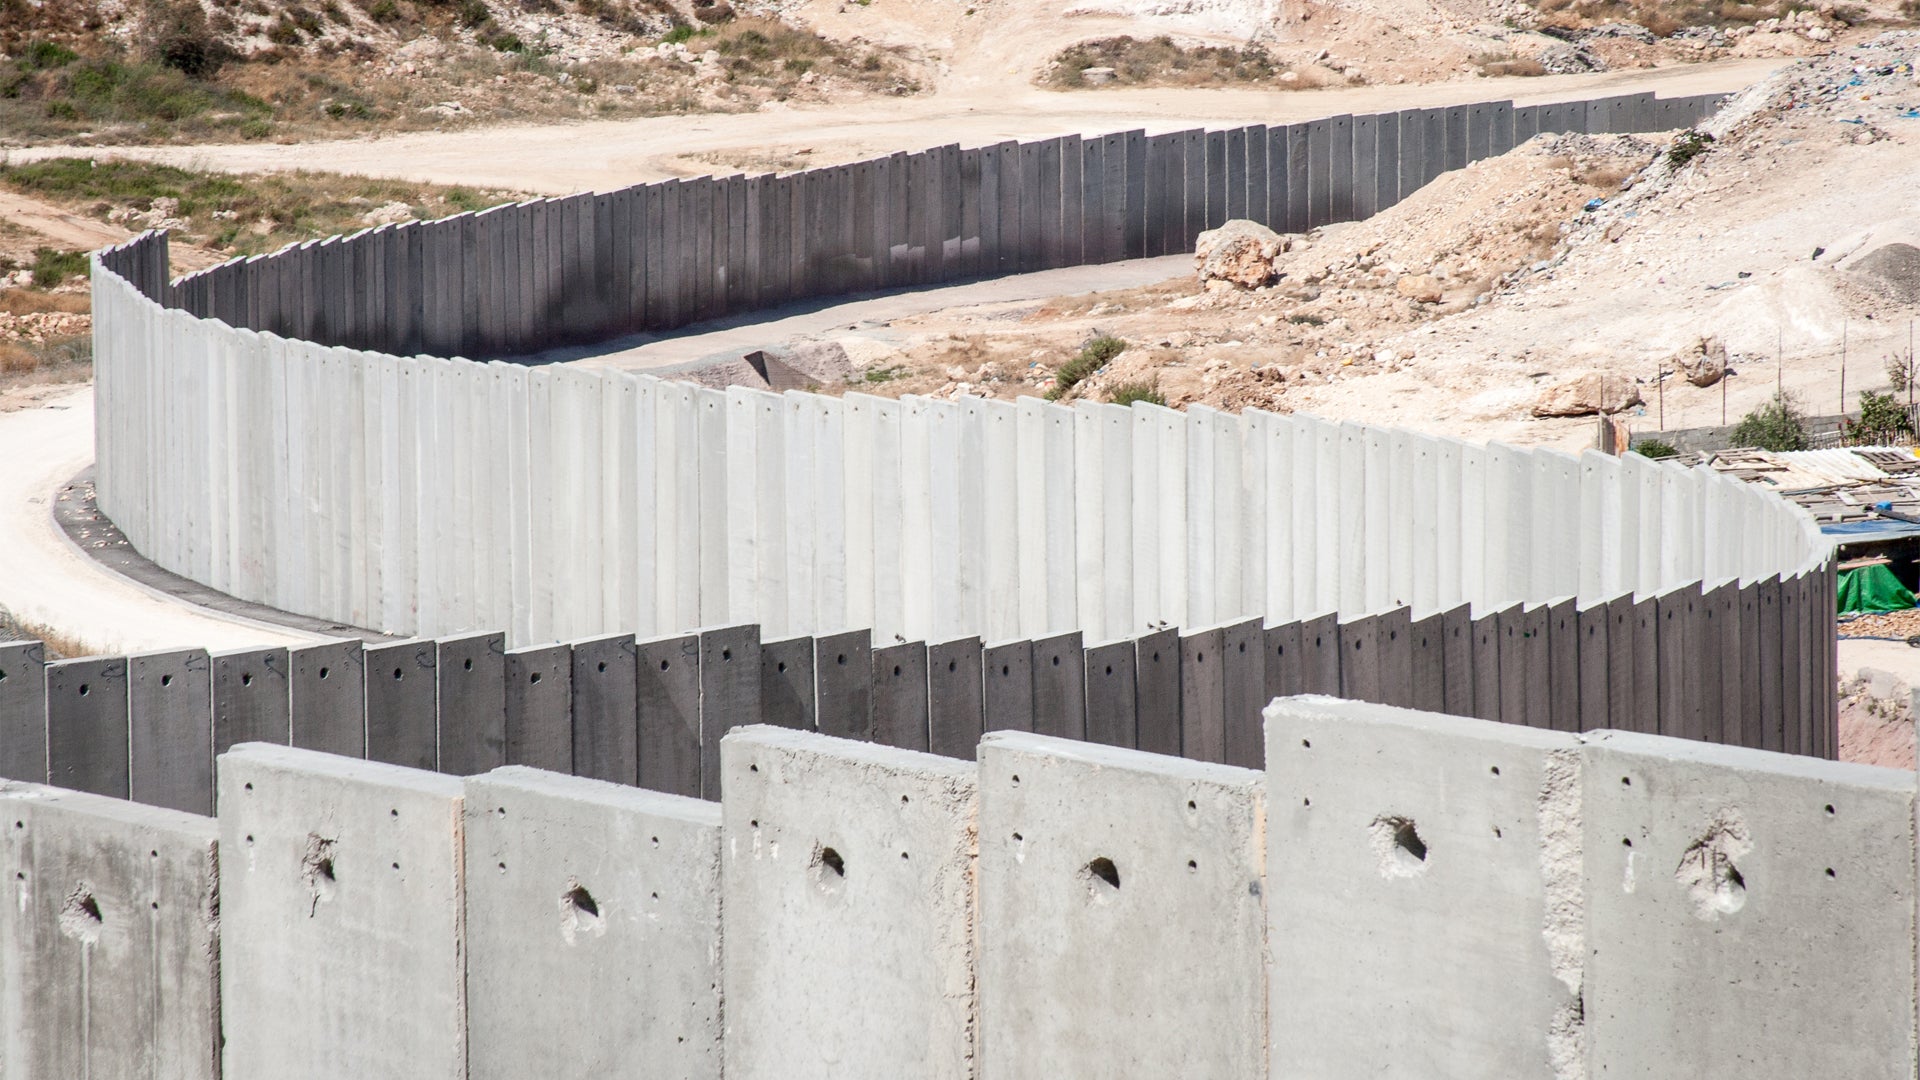 A picture of the separation wall between Israel and Gaza.